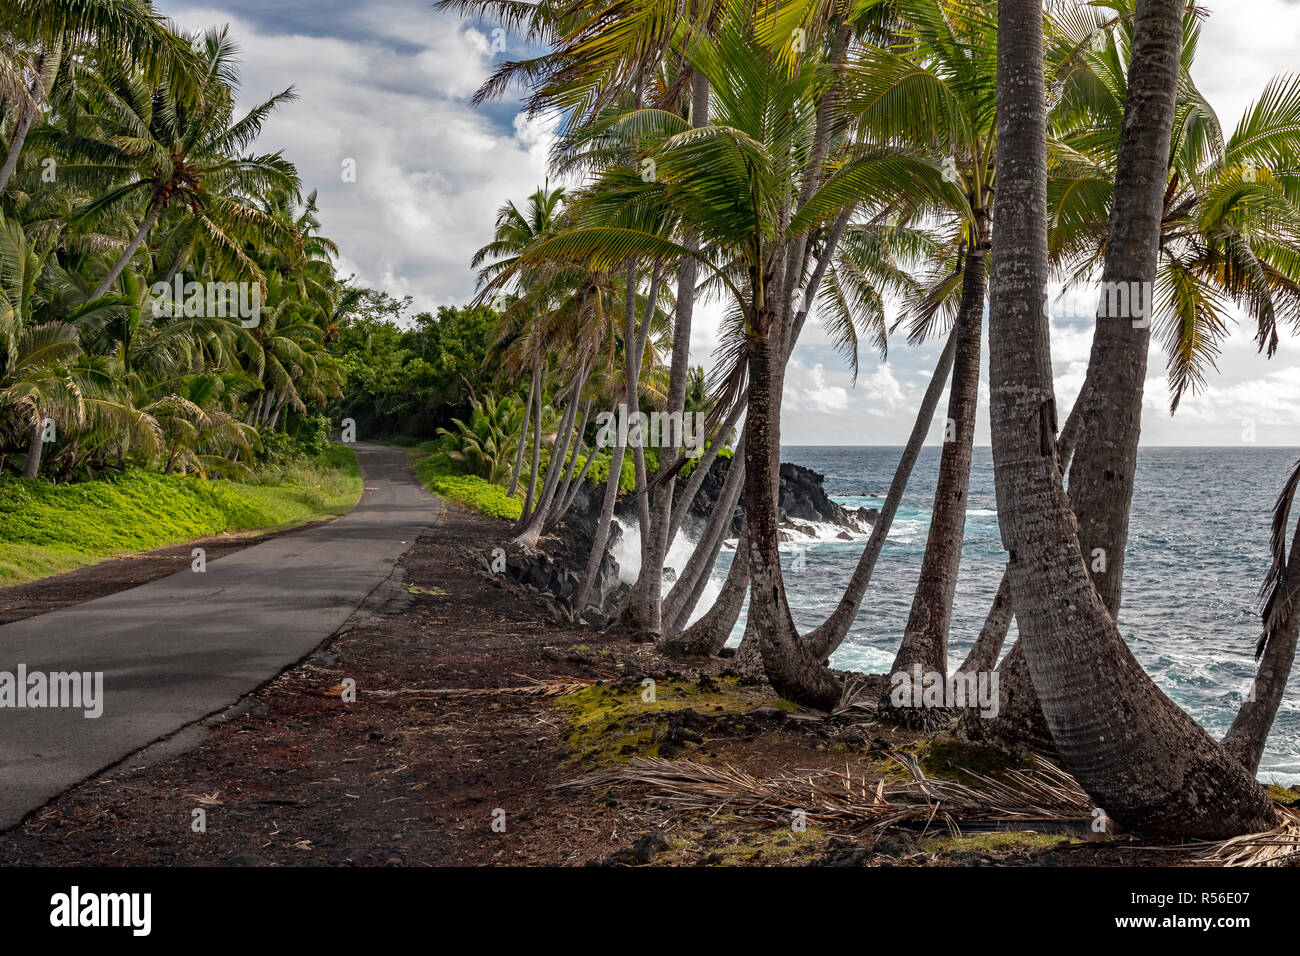 Opihikao, Hawaii - The Pacific coast in the Puna District of the Big Island. Stock Photo